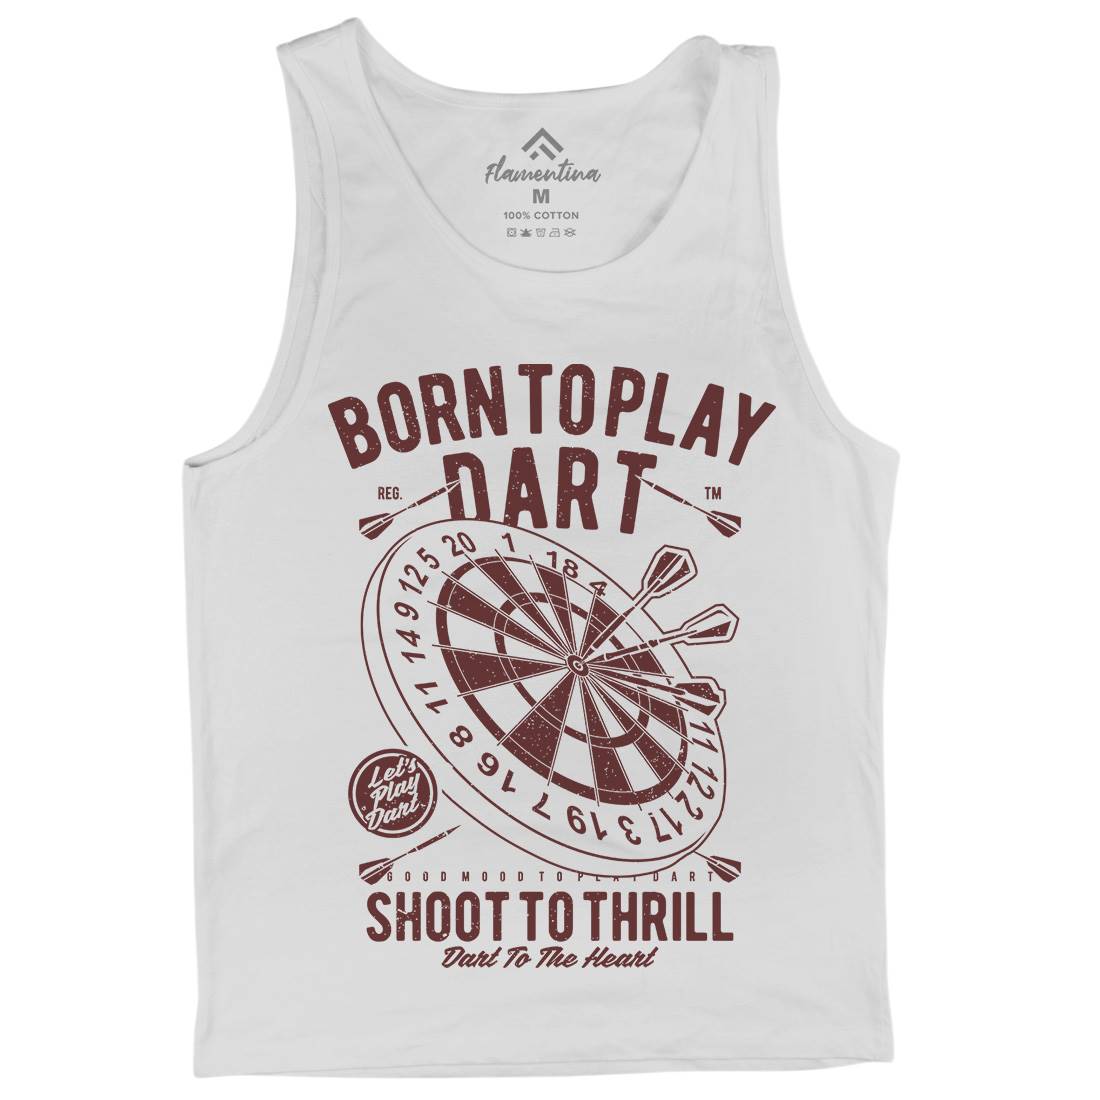 Born To Play Mens Tank Top Vest Sport A622